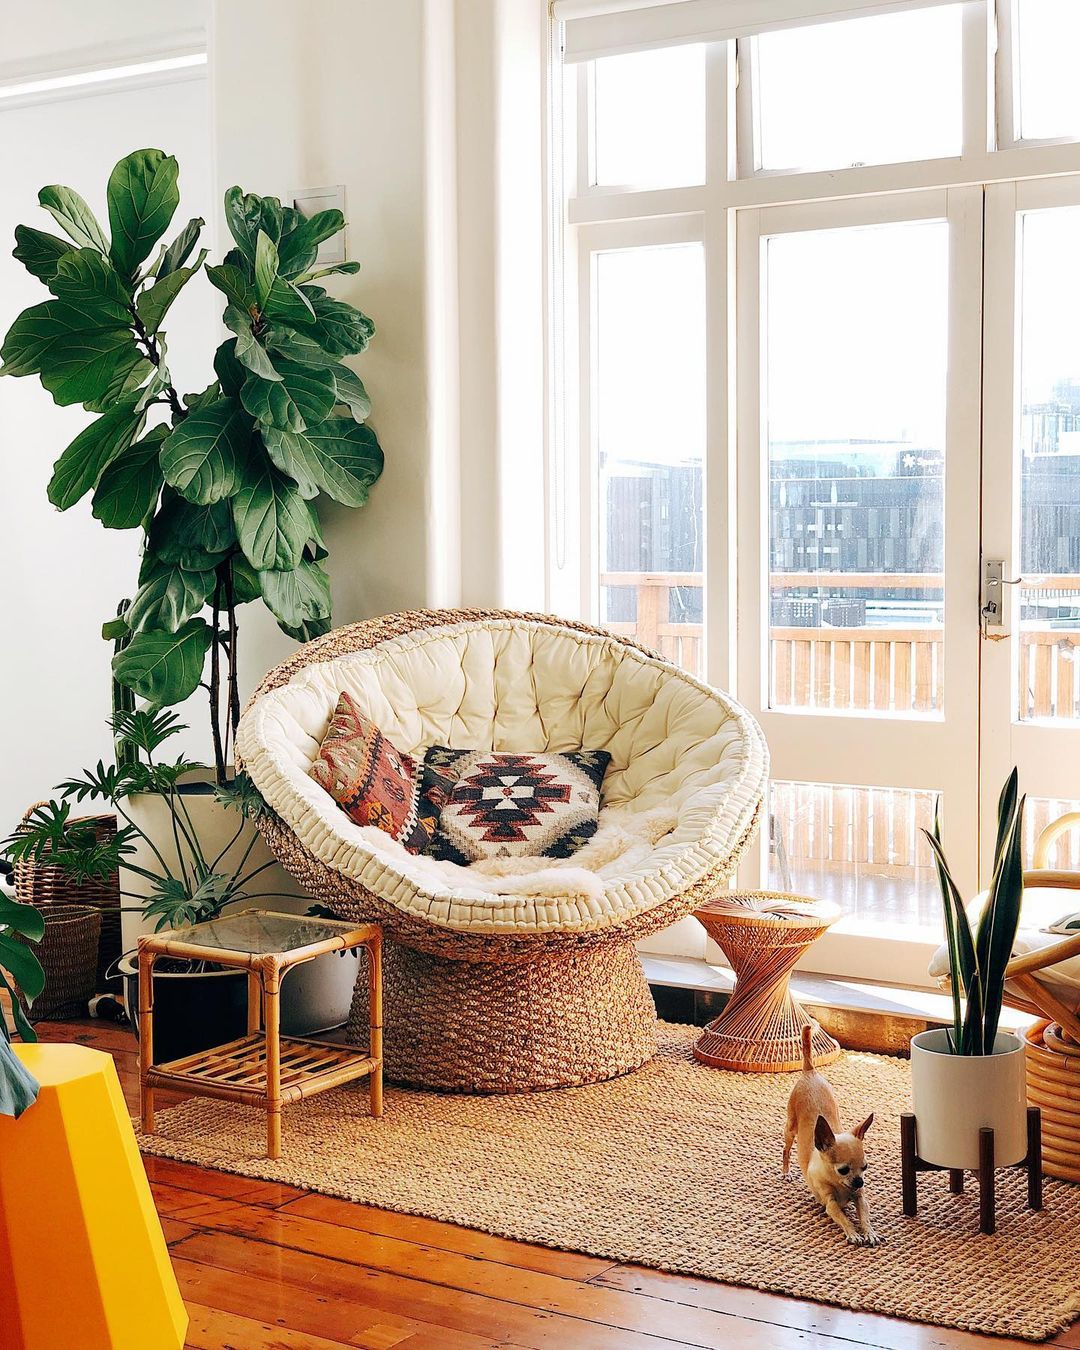 Chihuahua stretches in front of a bamboo side table, rattan papasan chair, spun bamboo side table, and various plants. Photo by Instagram user @mrcigar.